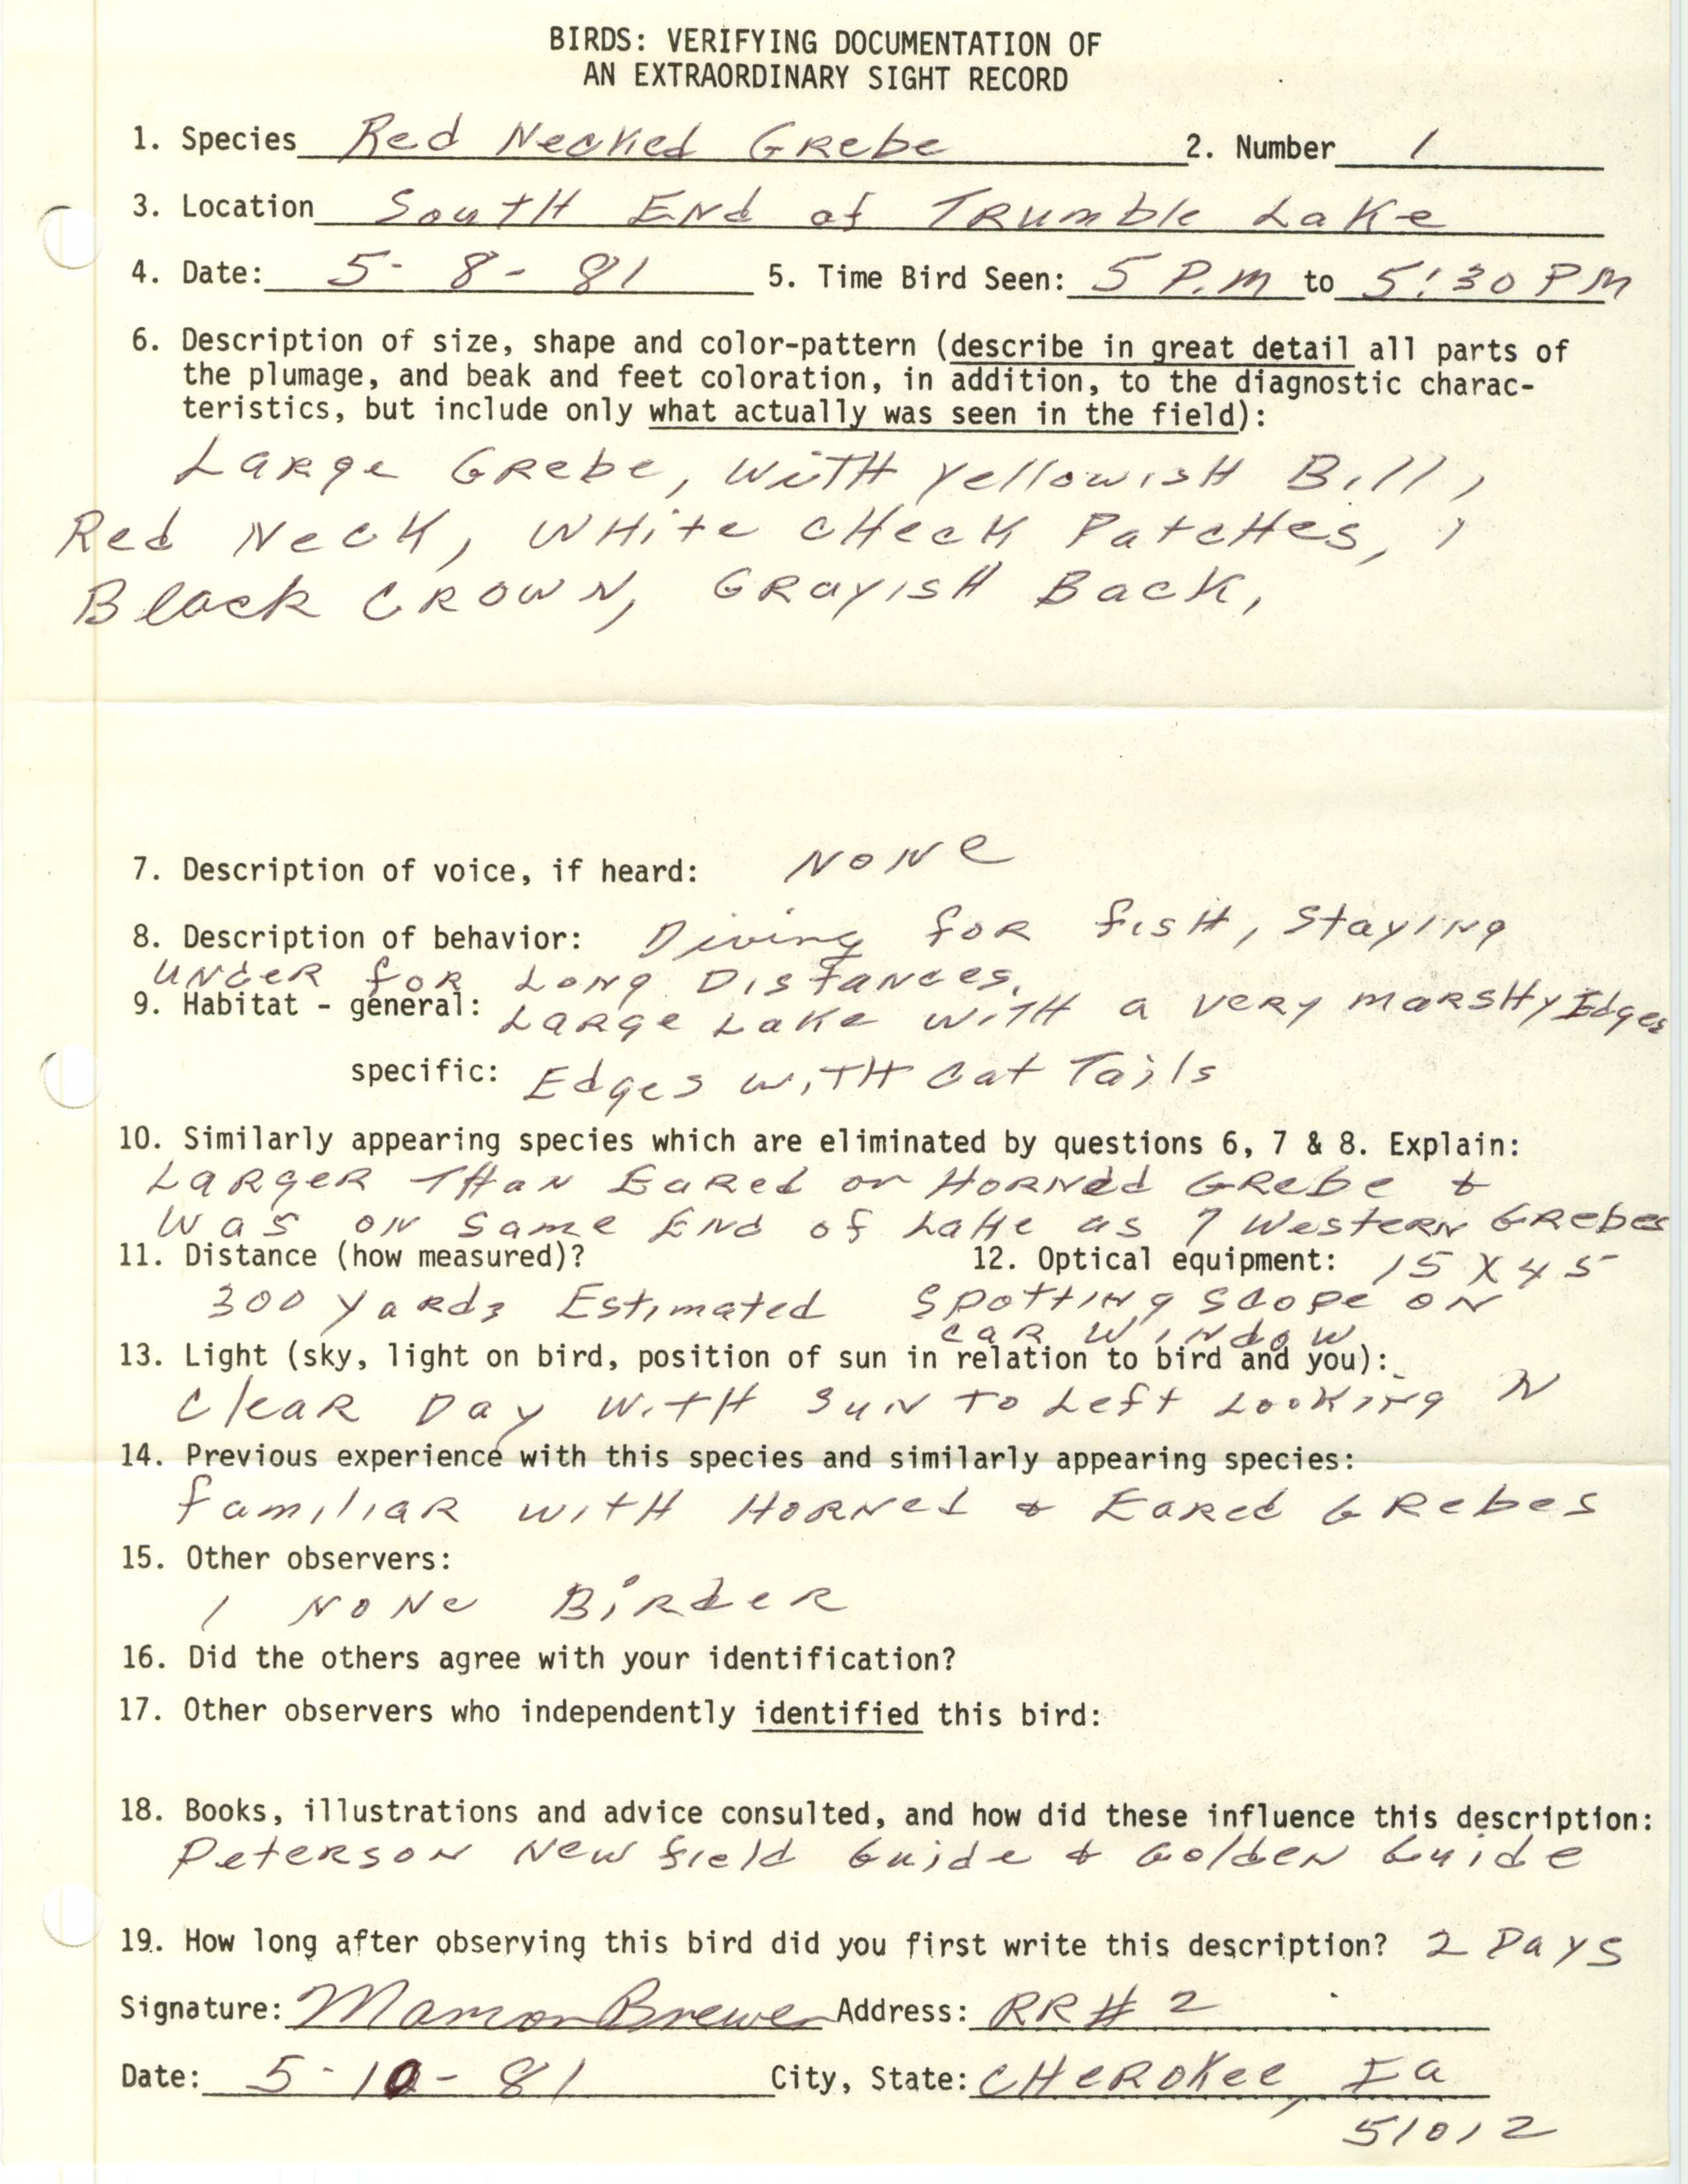 Rare bird documentation form for Red-necked Grebe at Trumbull Lake, 1981